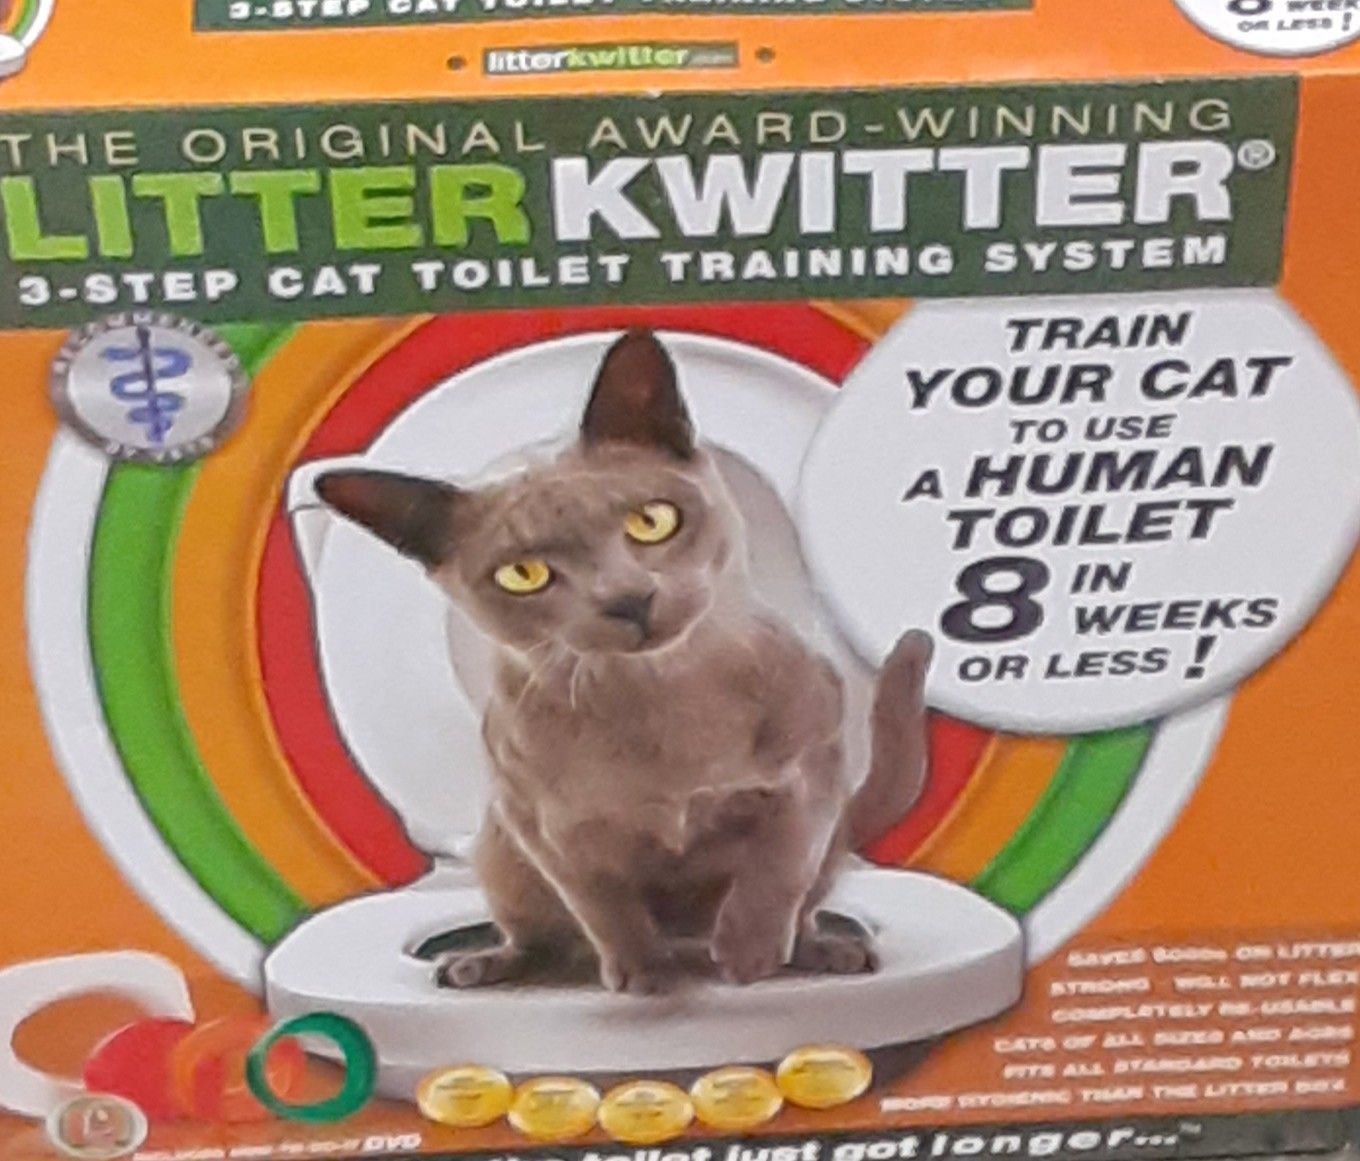 Litter Kwitter train your cat to use a human toilet